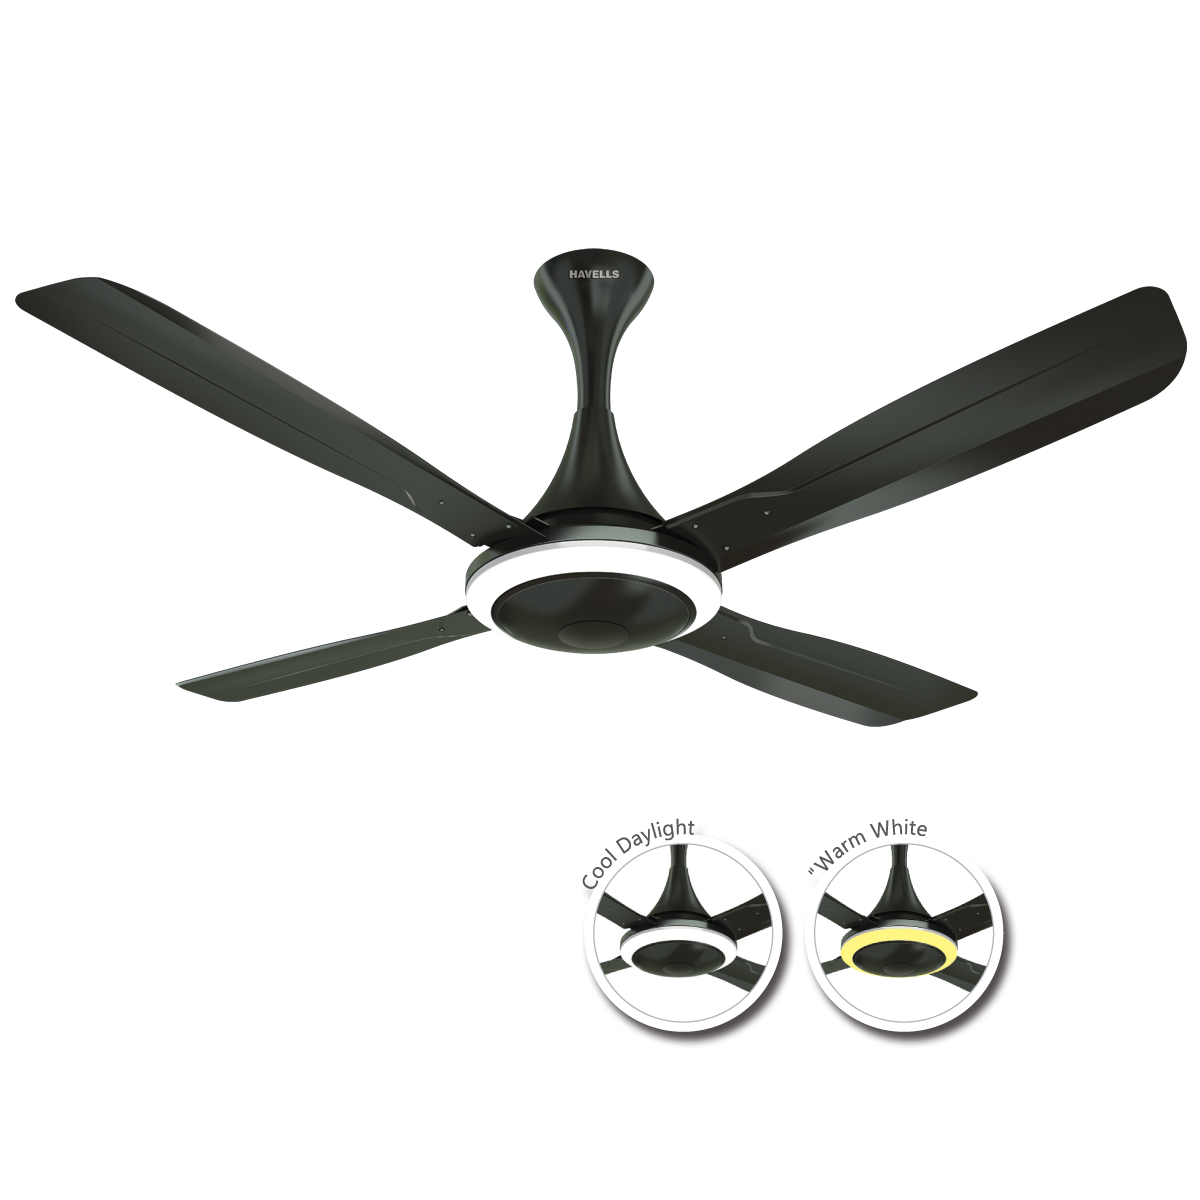 Havells 4 Blade Ceiling Fan 1320mm with Under Light URBANE UL